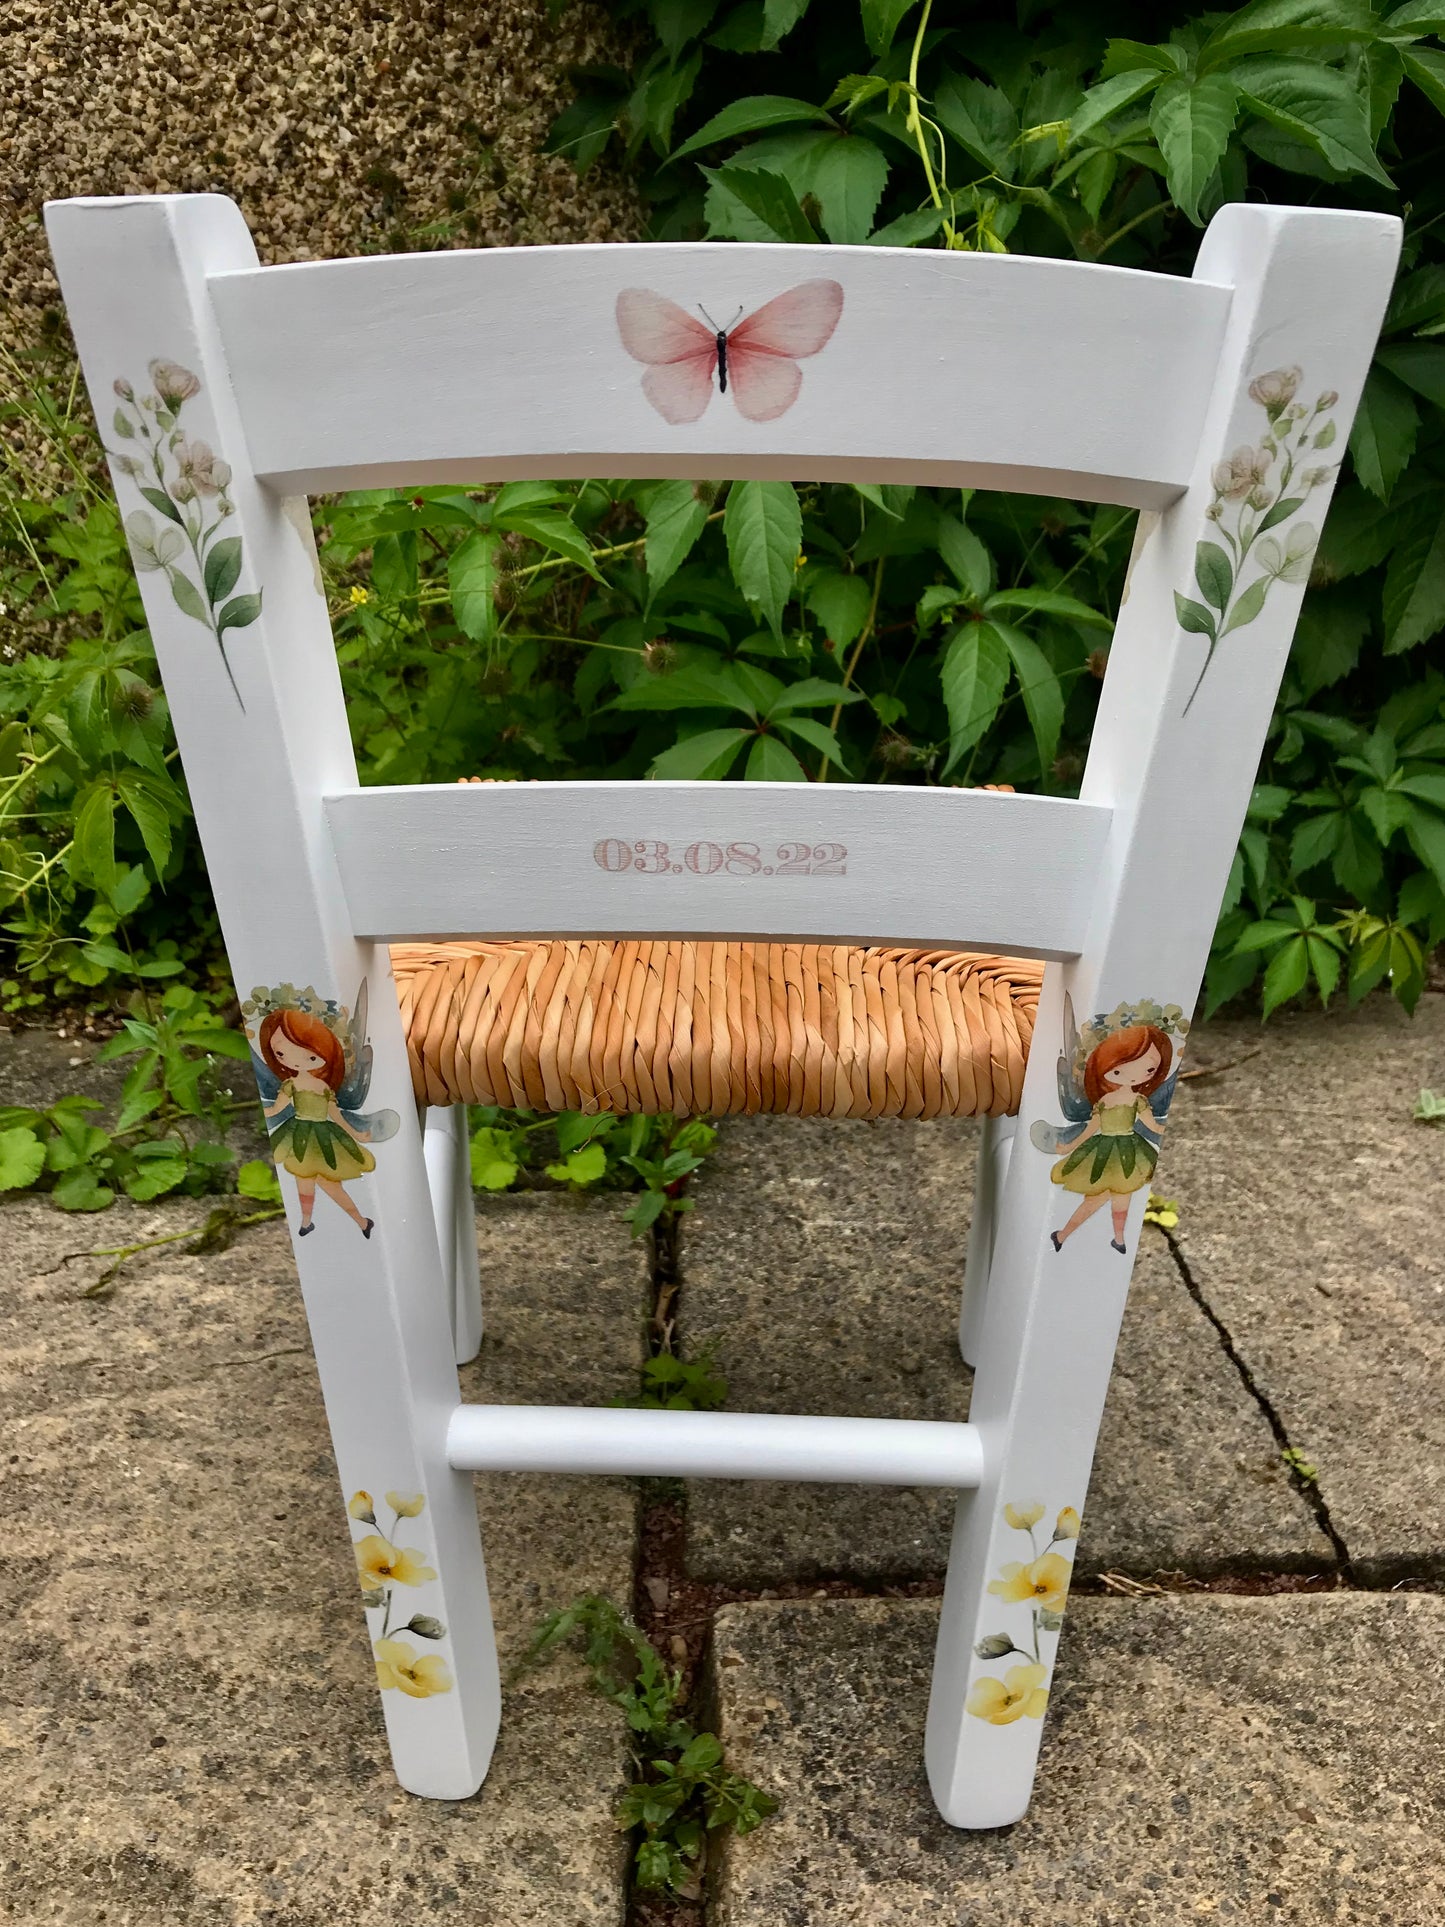 Rush seat personalised children's chair - fairy flowers theme - made to order